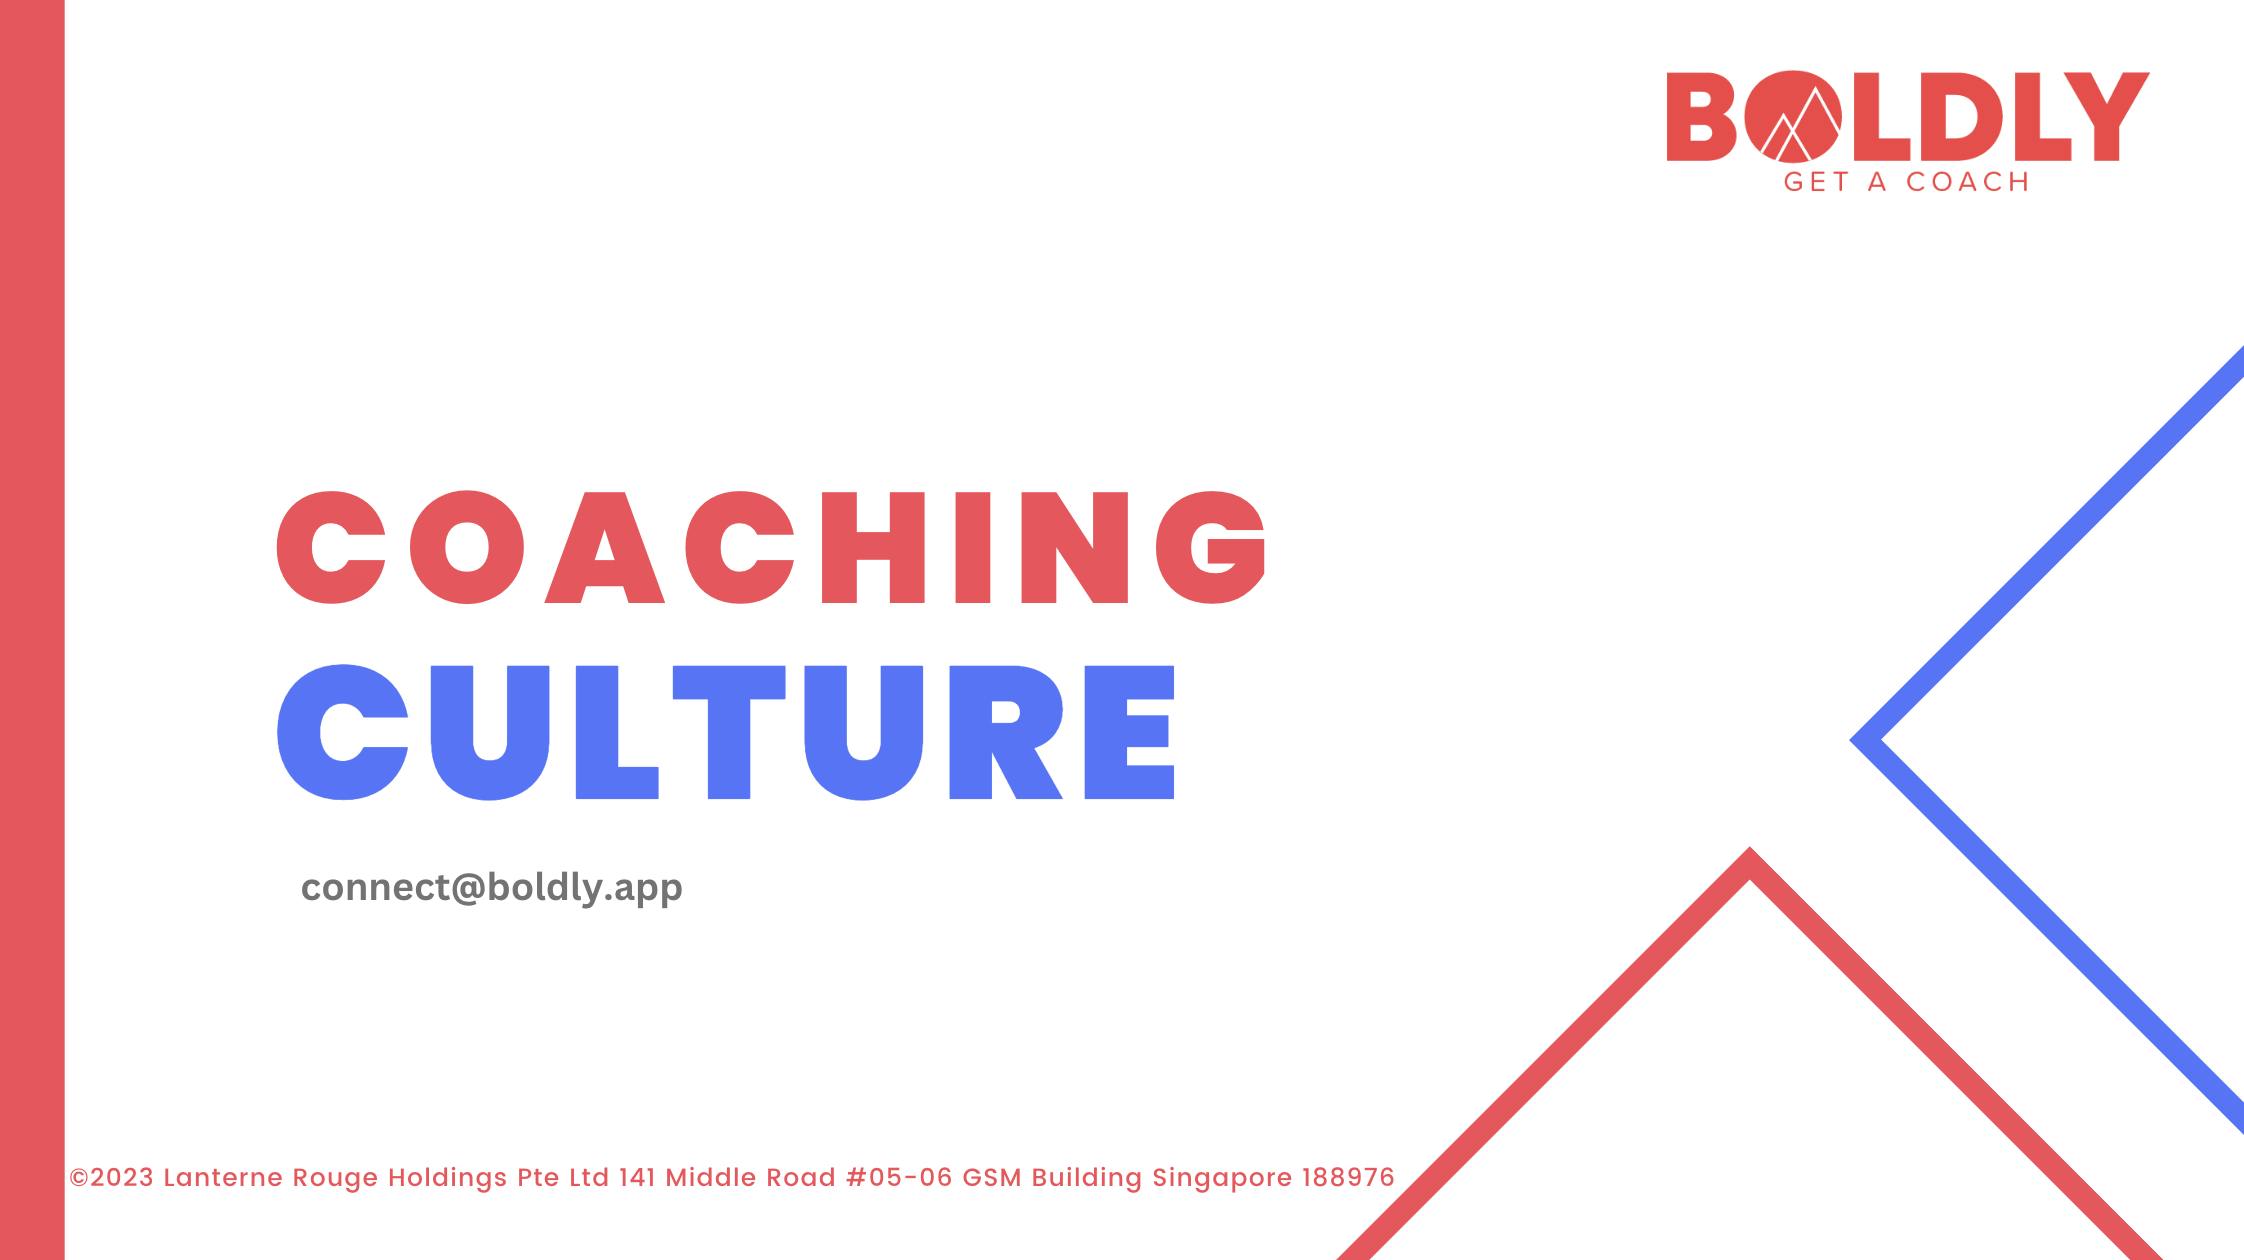 Learn about coaching culture and how BOLDLY can help